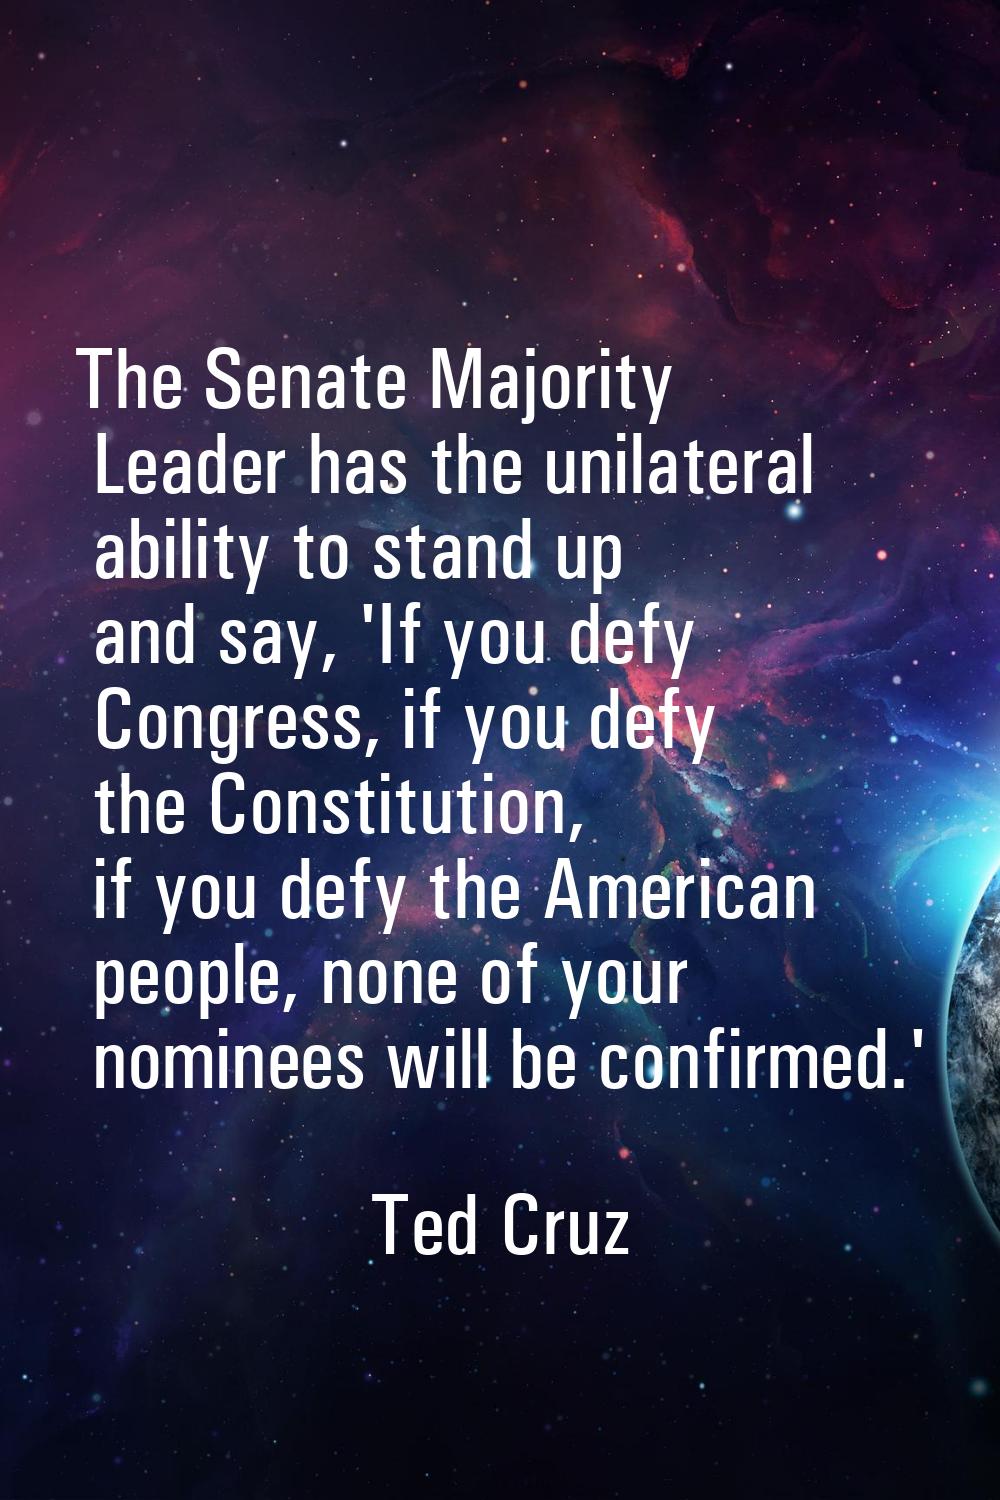 The Senate Majority Leader has the unilateral ability to stand up and say, 'If you defy Congress, i